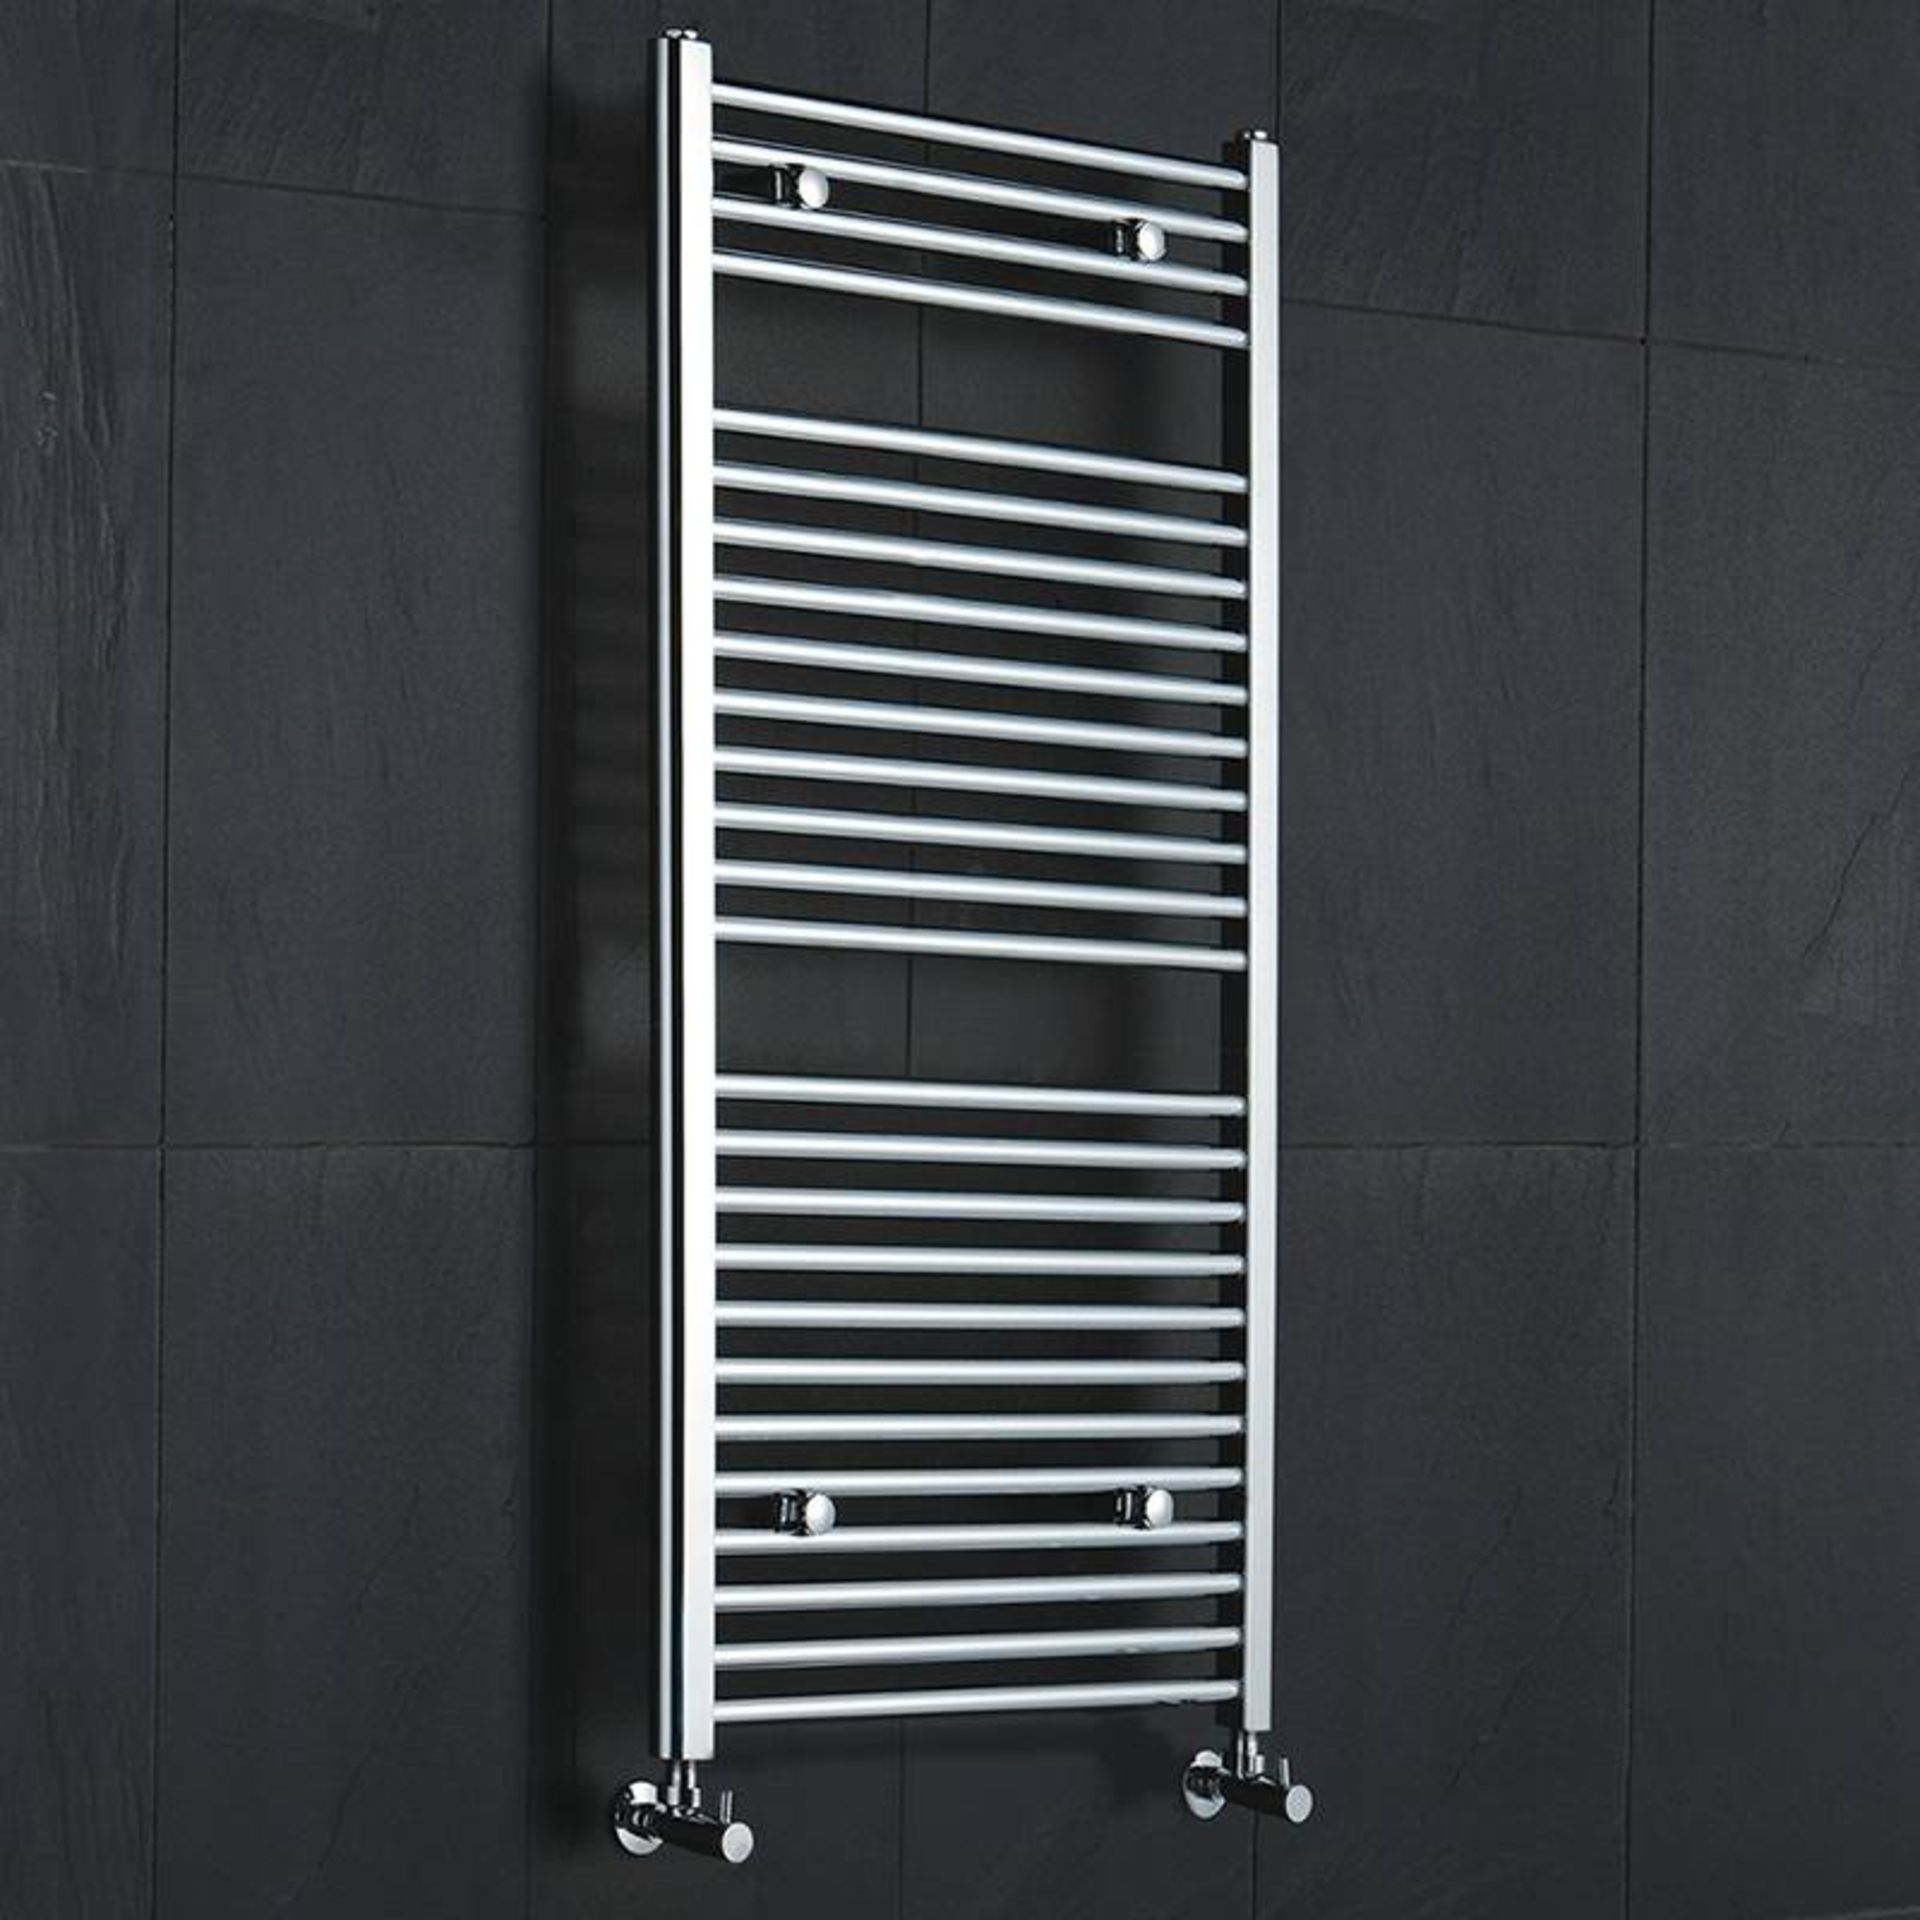 1 x 600x1800 STRAIGHT CENTER RAIL WALL MOUNTABLE TOWEL RADIATOR IN ASSORTED COLOURS (PLEASE NOTE